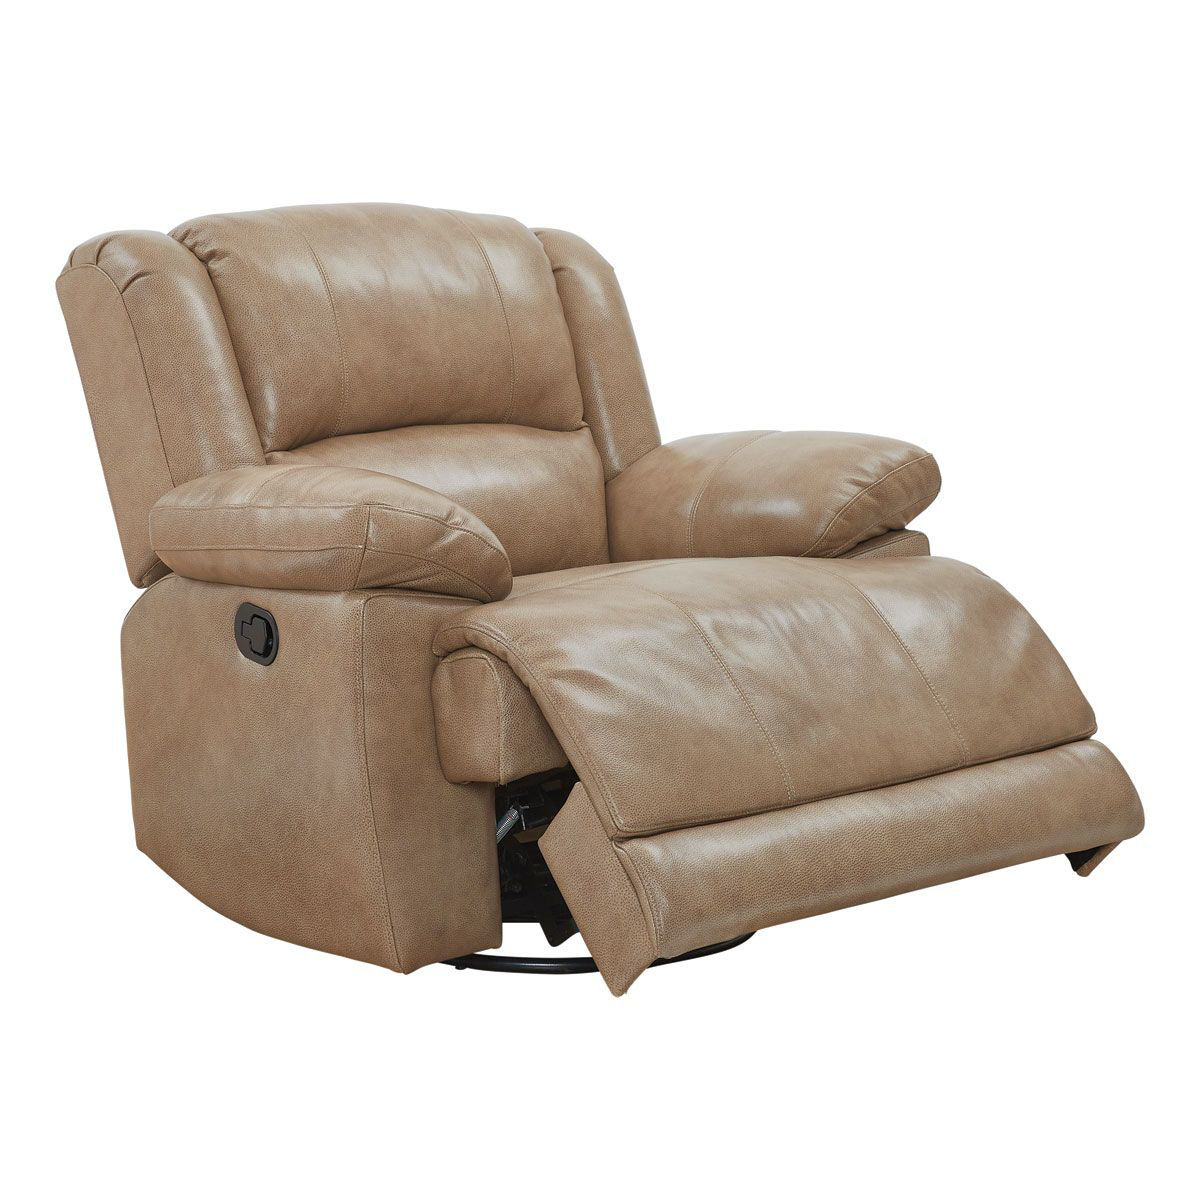 https://www.badcock.com/images/thumbs/0031566_victor-leather-manual-swivel-glider-recliner.jpeg